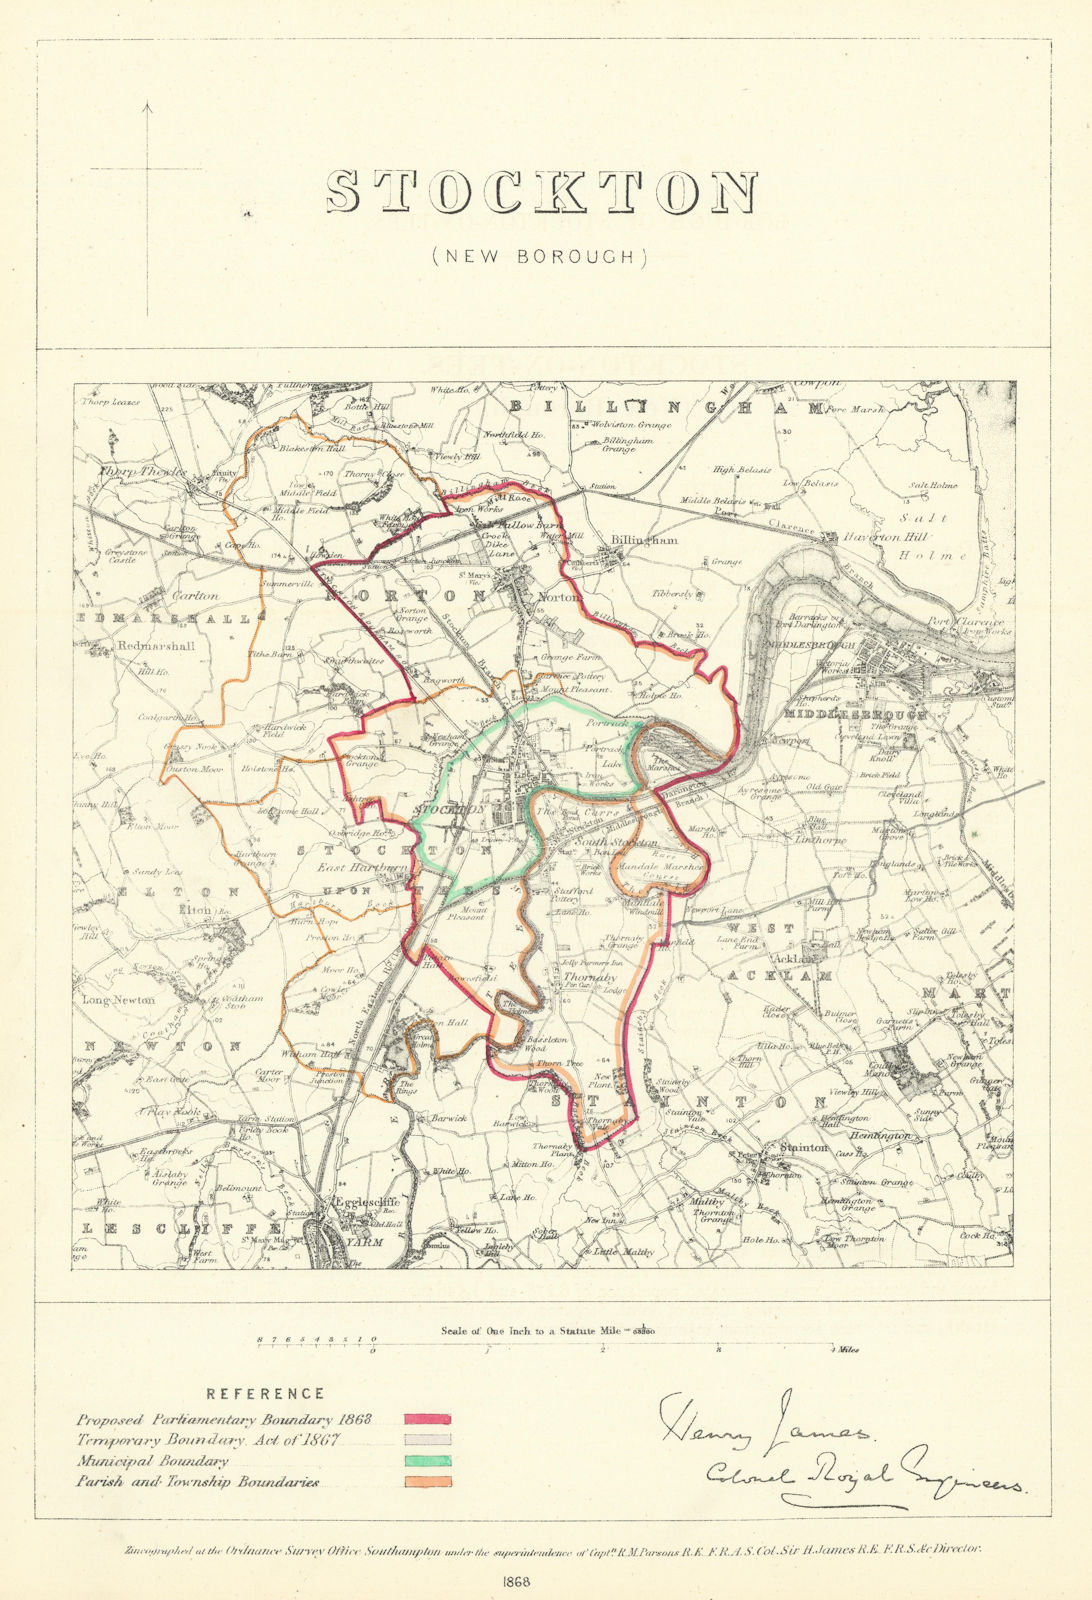 Stockton, Durham. JAMES. Parliamentary Boundary Commission 1868 old map